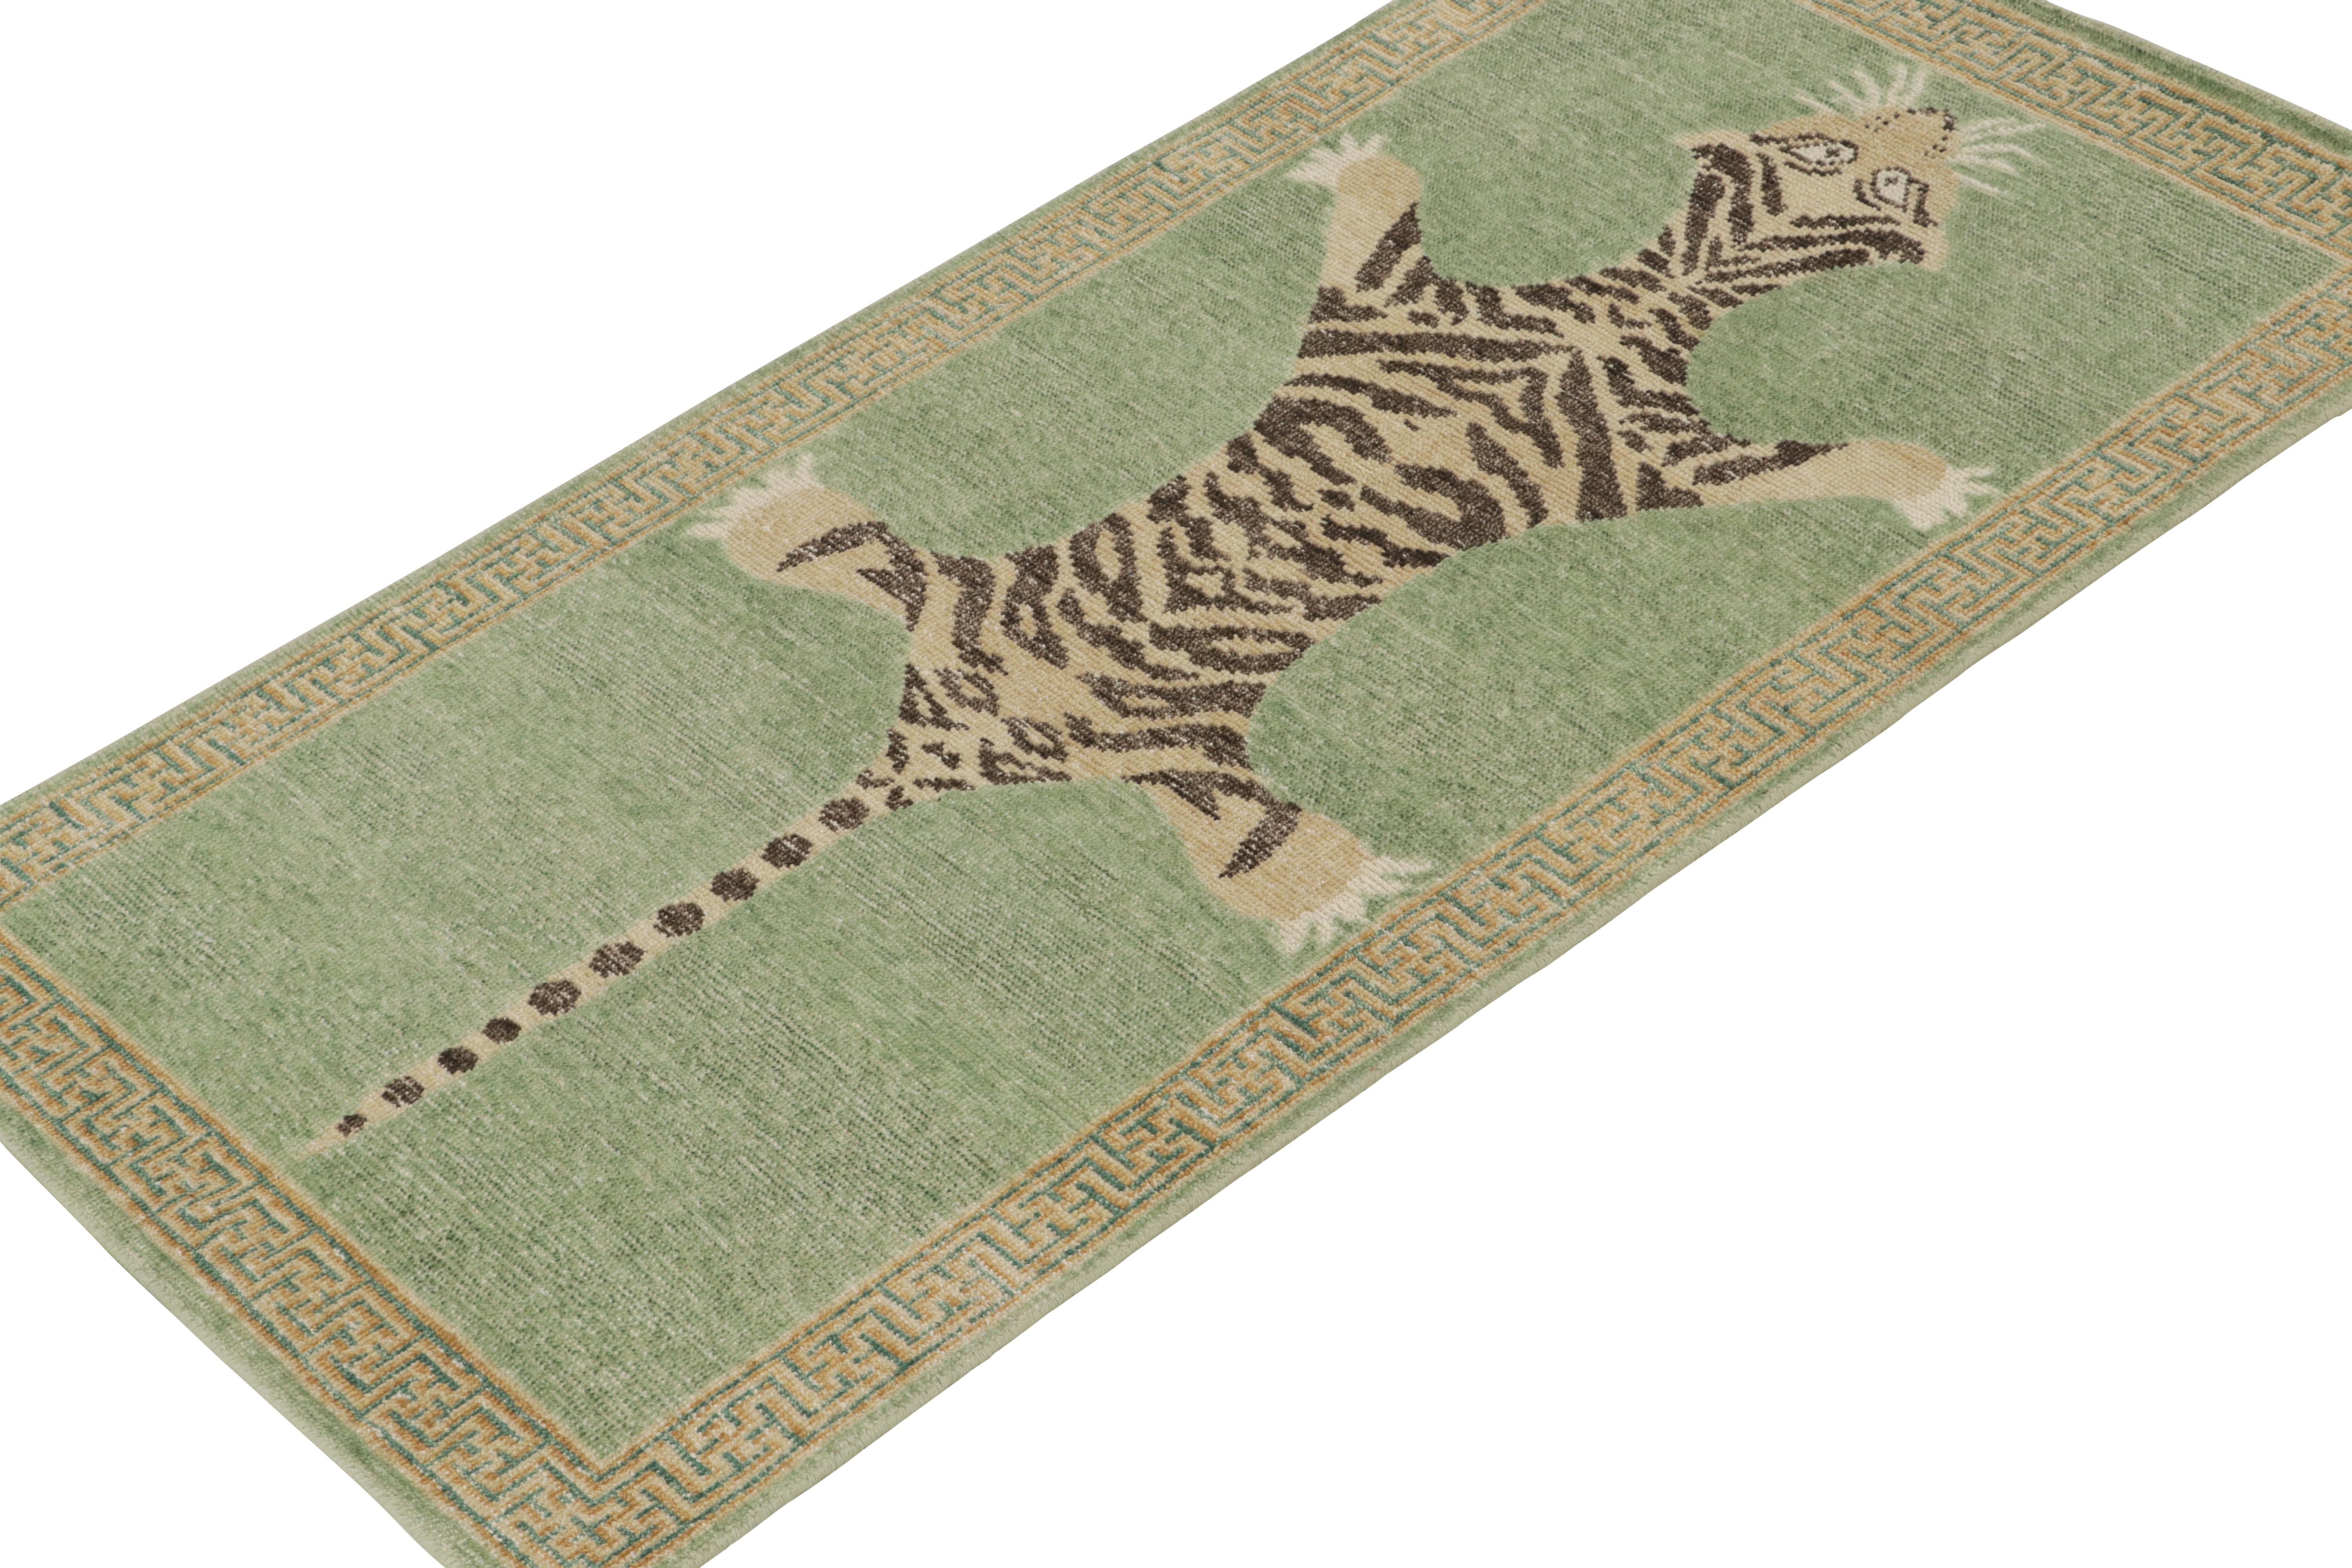 This 3x6 runner is a new addition to Rug & Kilim’s Homage Collection, that recaptures the time-honored Tiger skin rug design.

Further On the Design: 

This particular piece is inspired by antique Indian Tiger-skin rugs of the most regal,